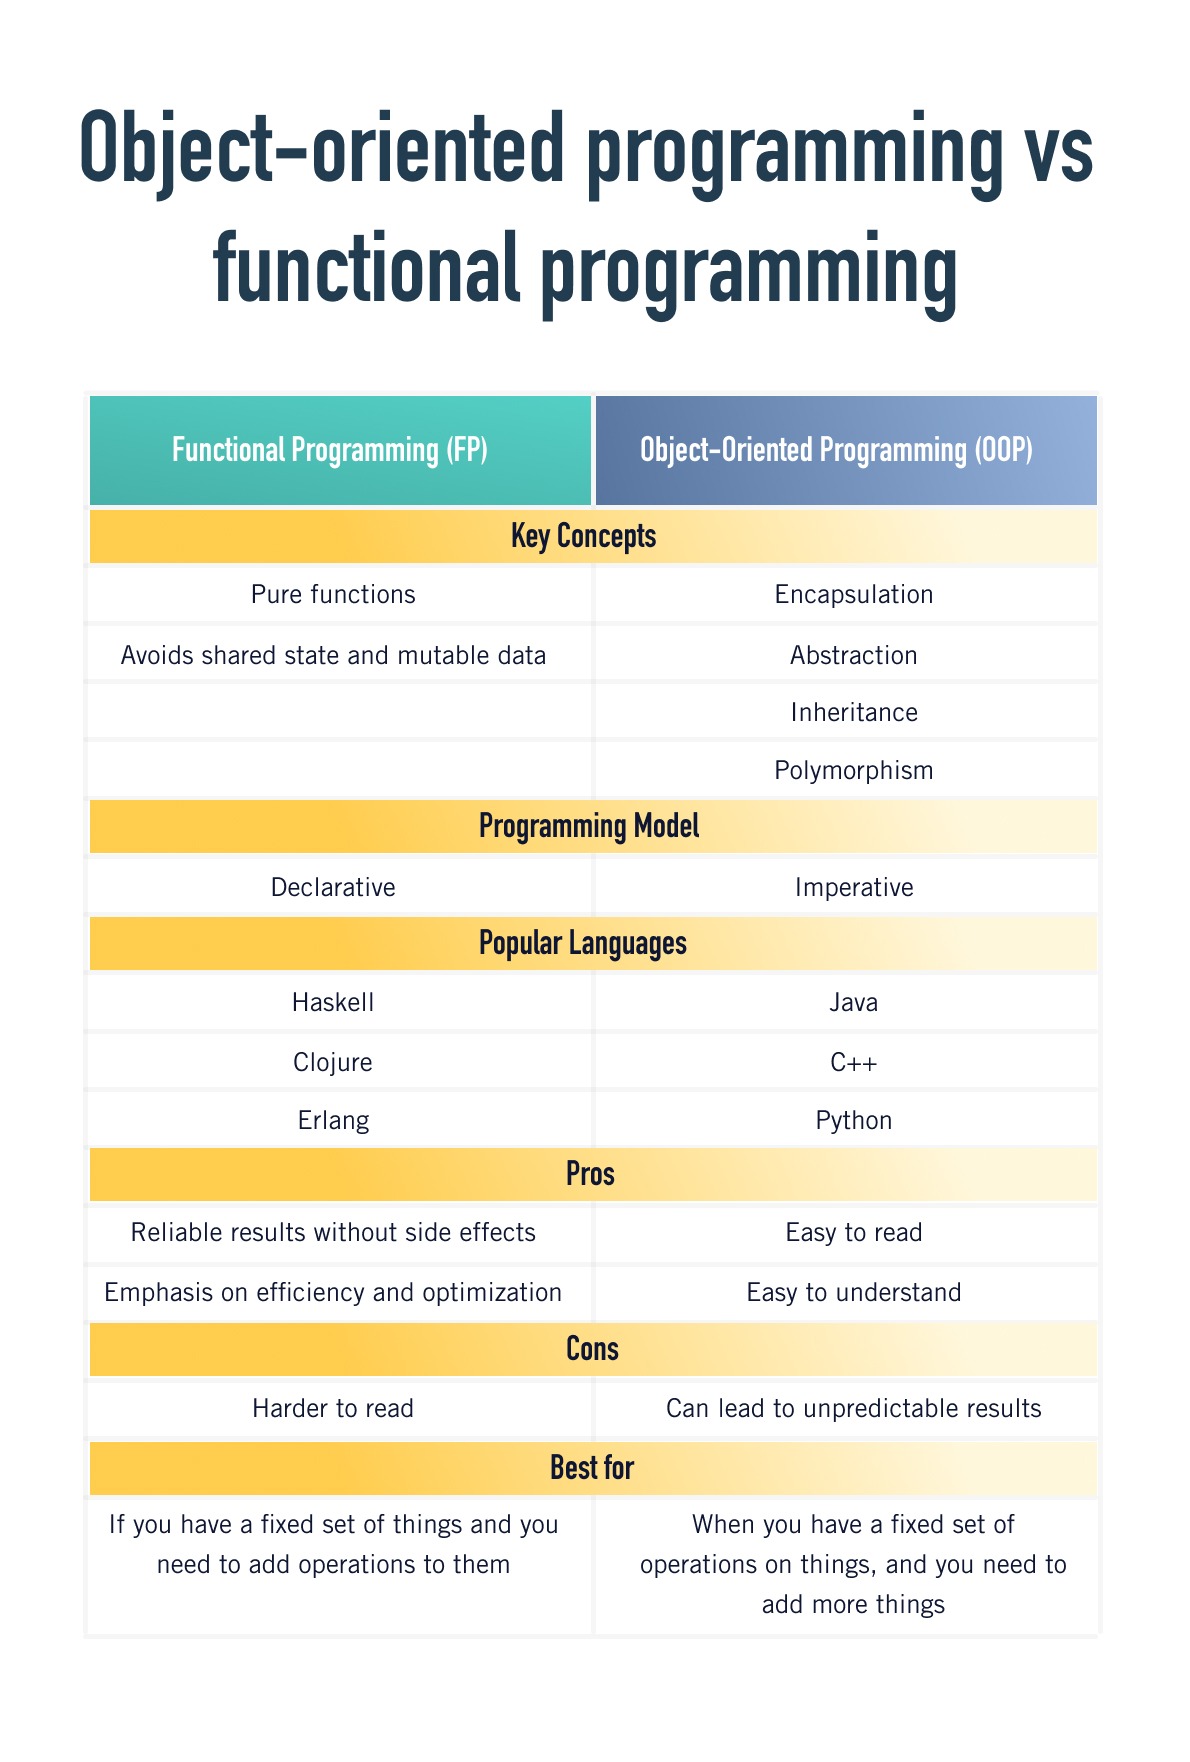 longdesc="Infographic showing the differences between Functional Programming versus Objet-Oriented Programming, dividing them in terms of key concepts of each, programming that use each, and so on."